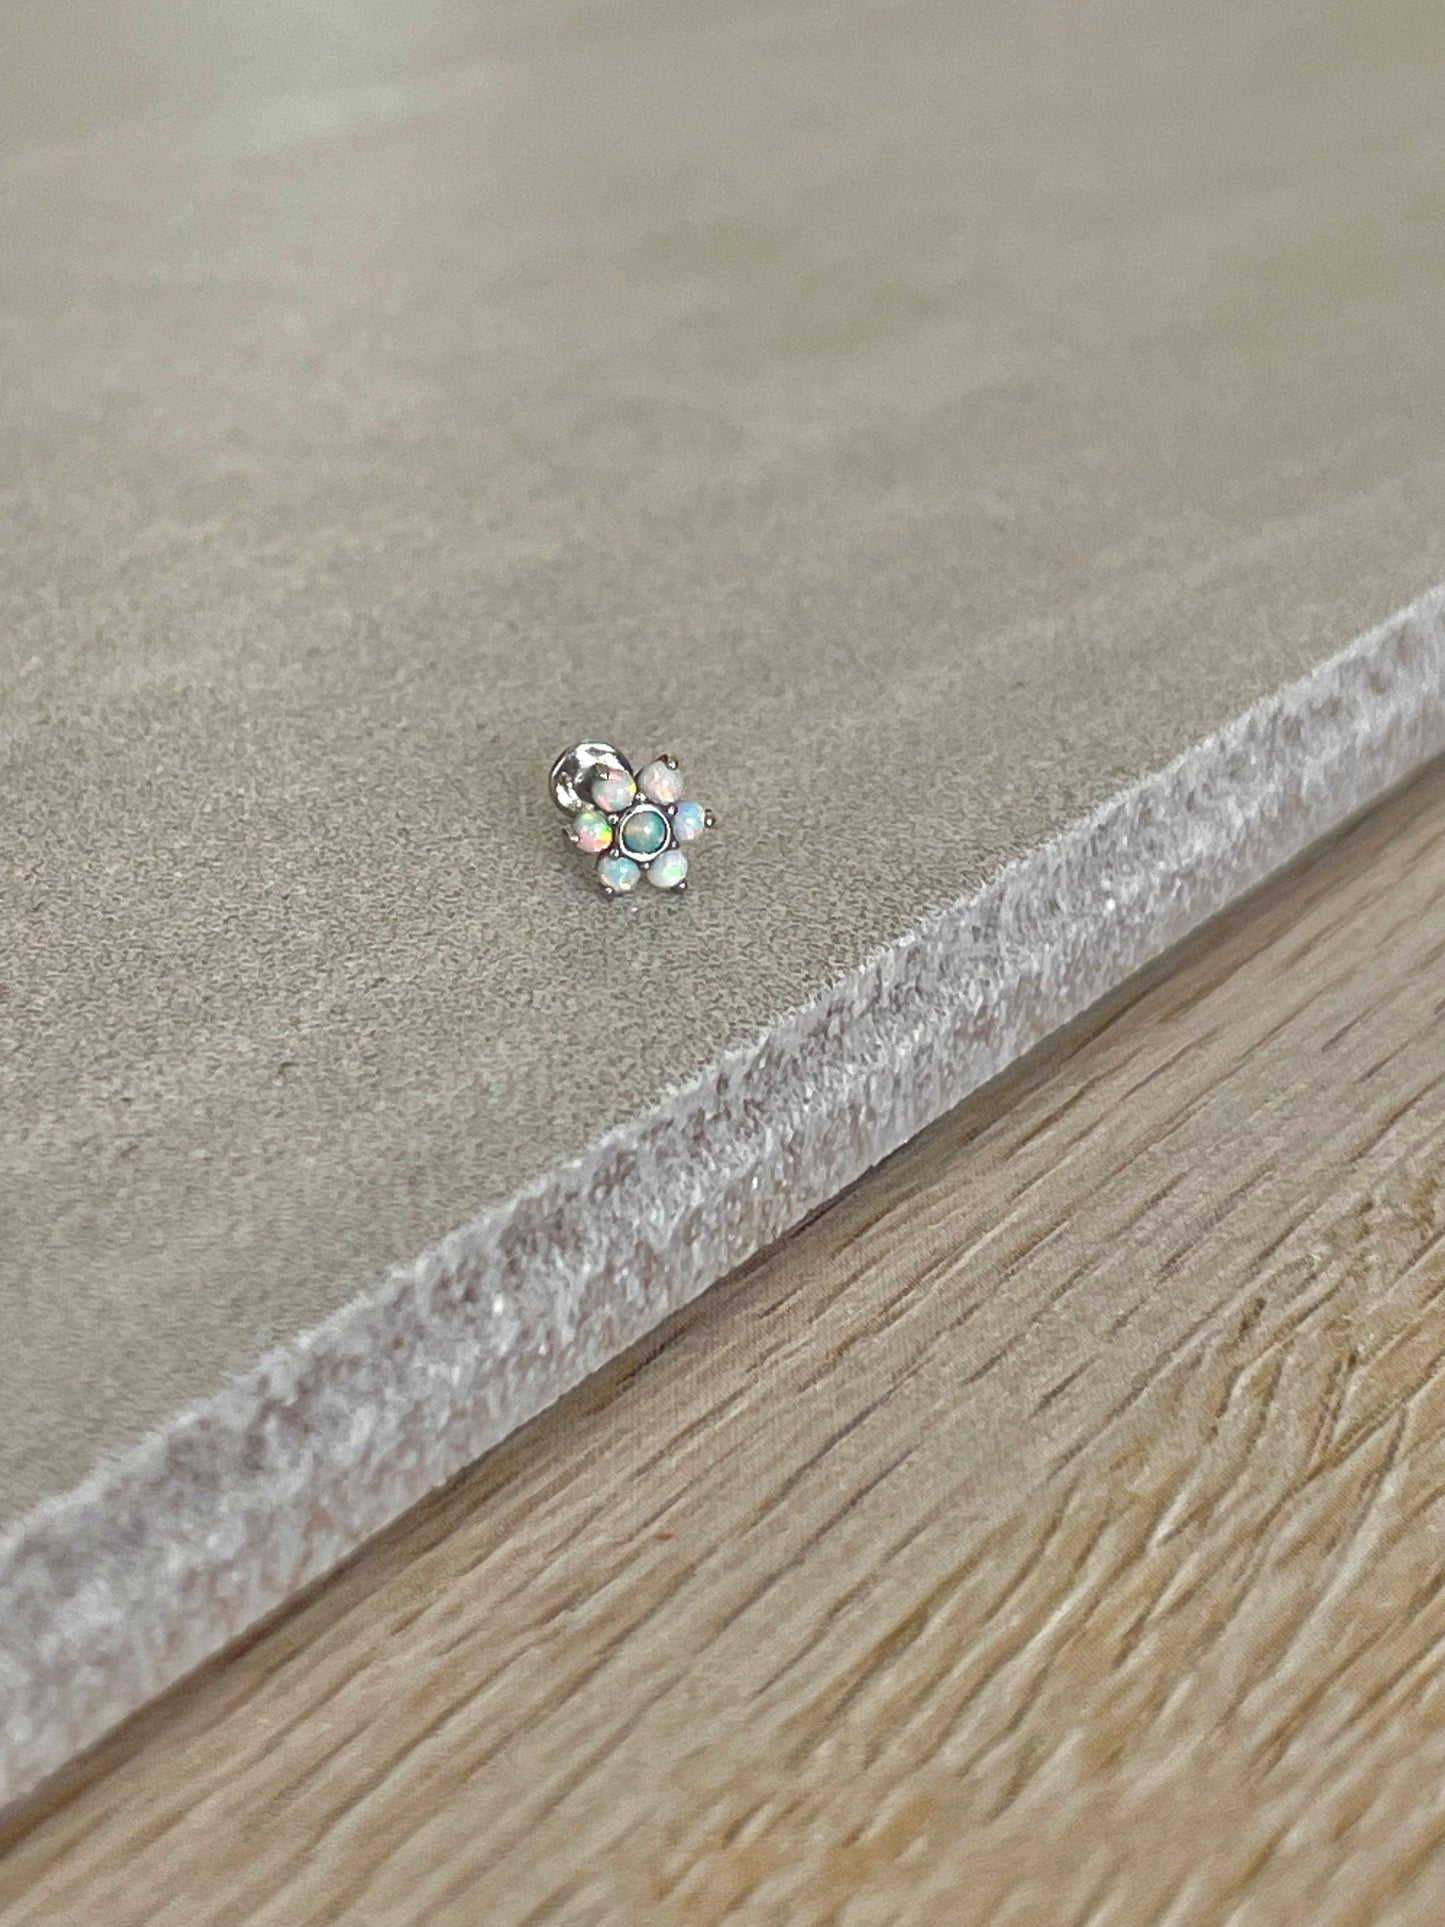 Internally Threaded Solid Gold Stud Piercing for Tragus, Conch, Helix and more. (16G 6mm 8mm)